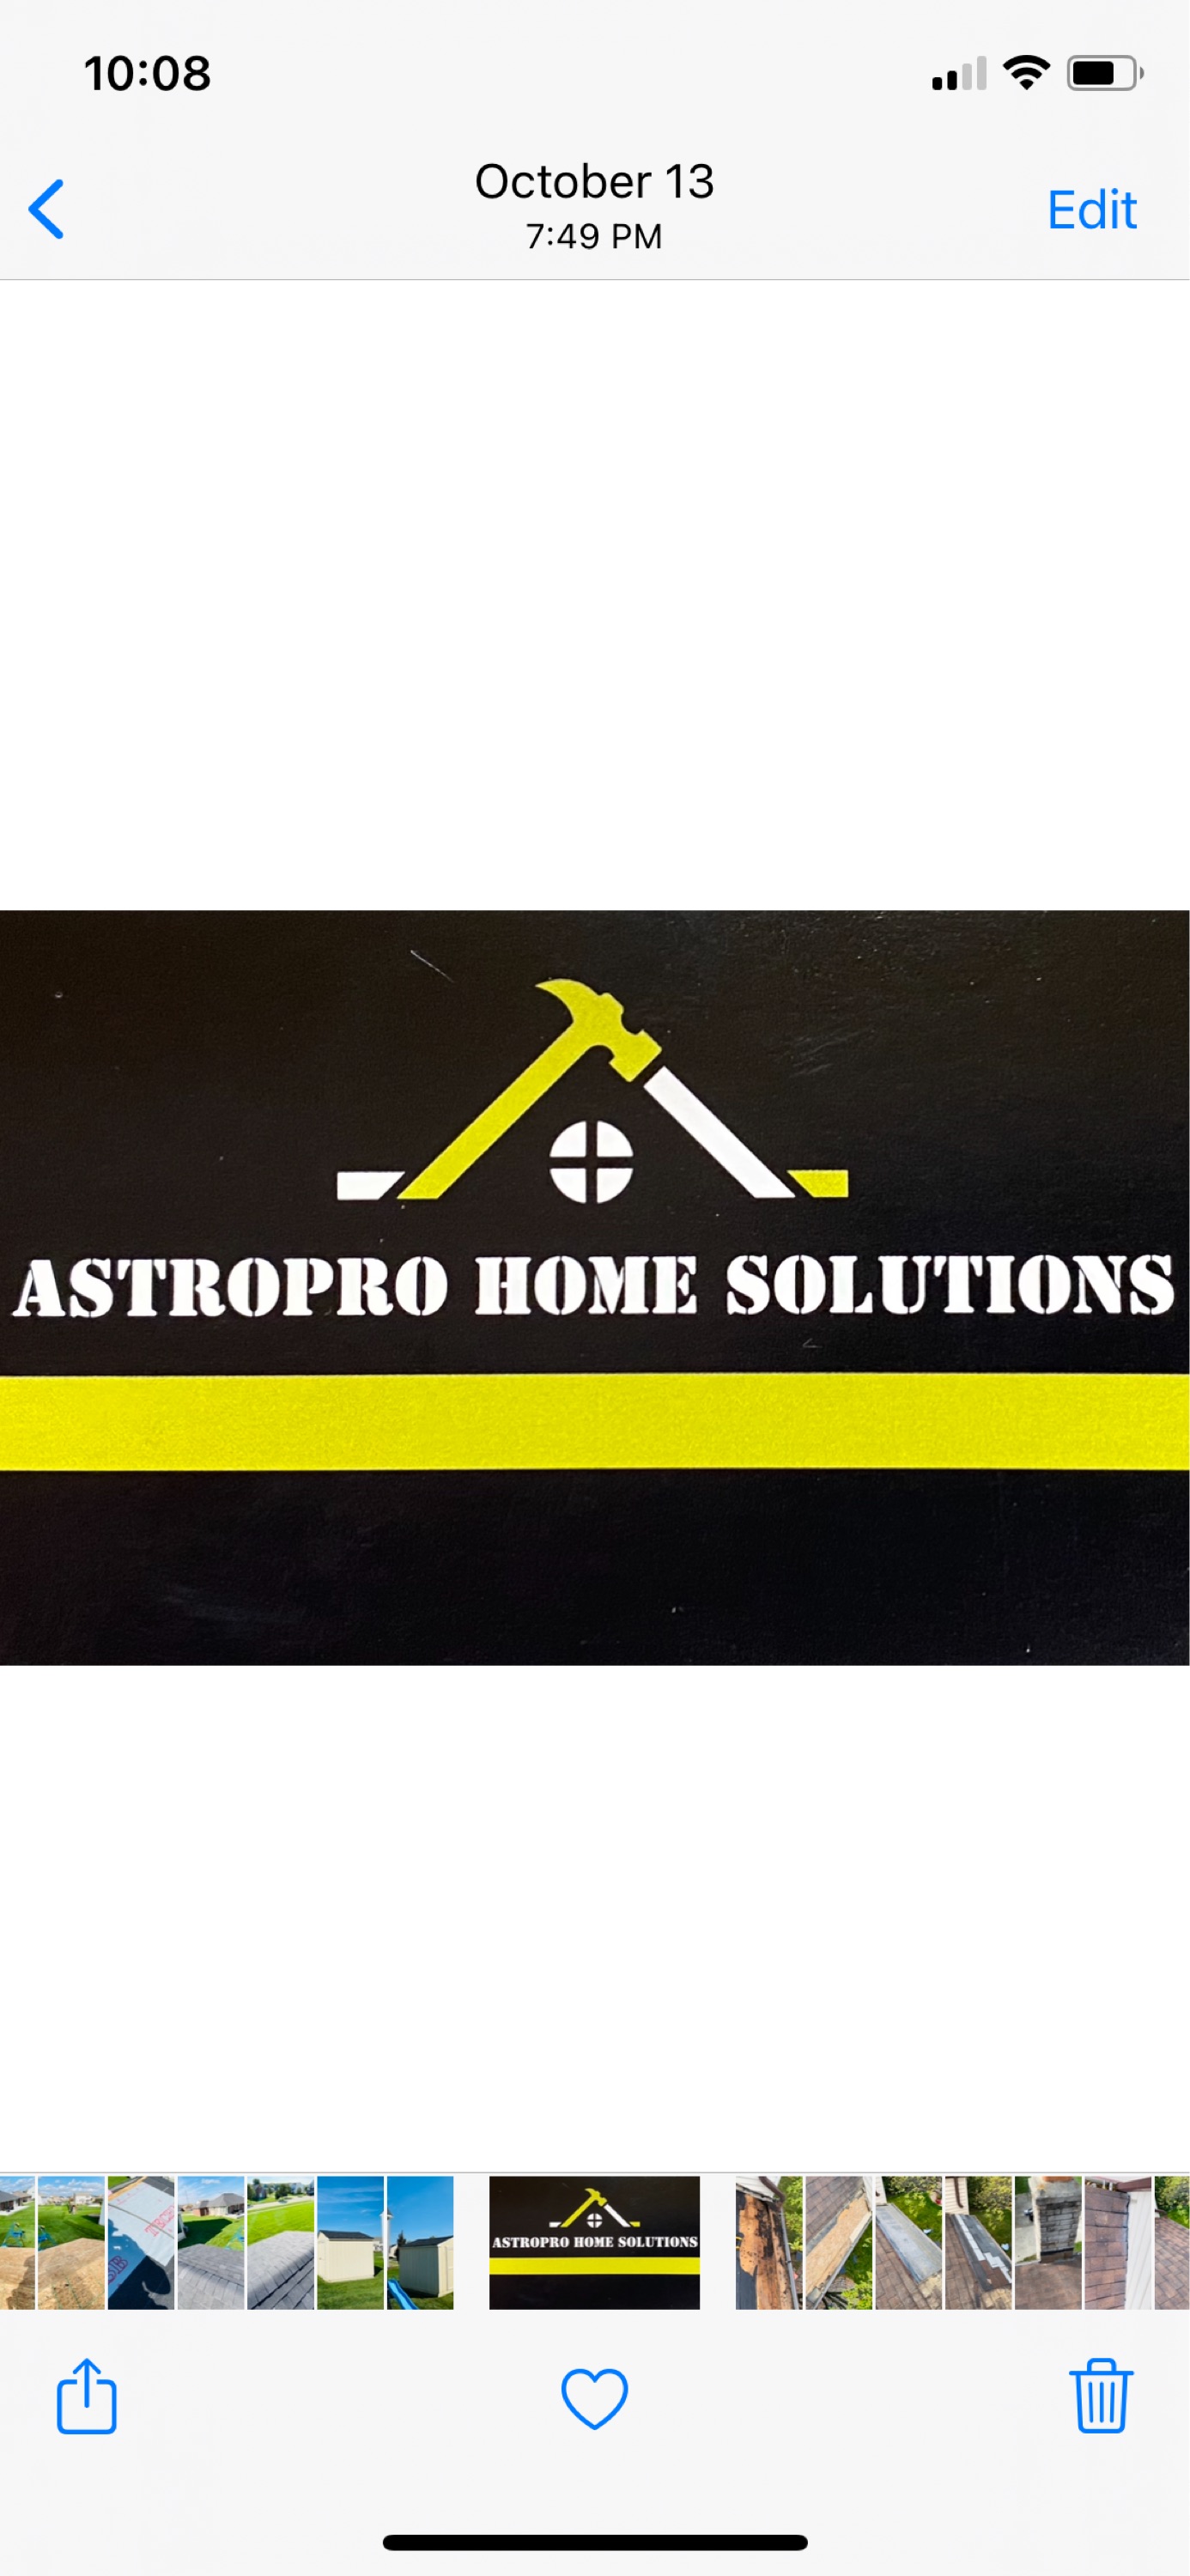 Astropro Home Solutions Logo